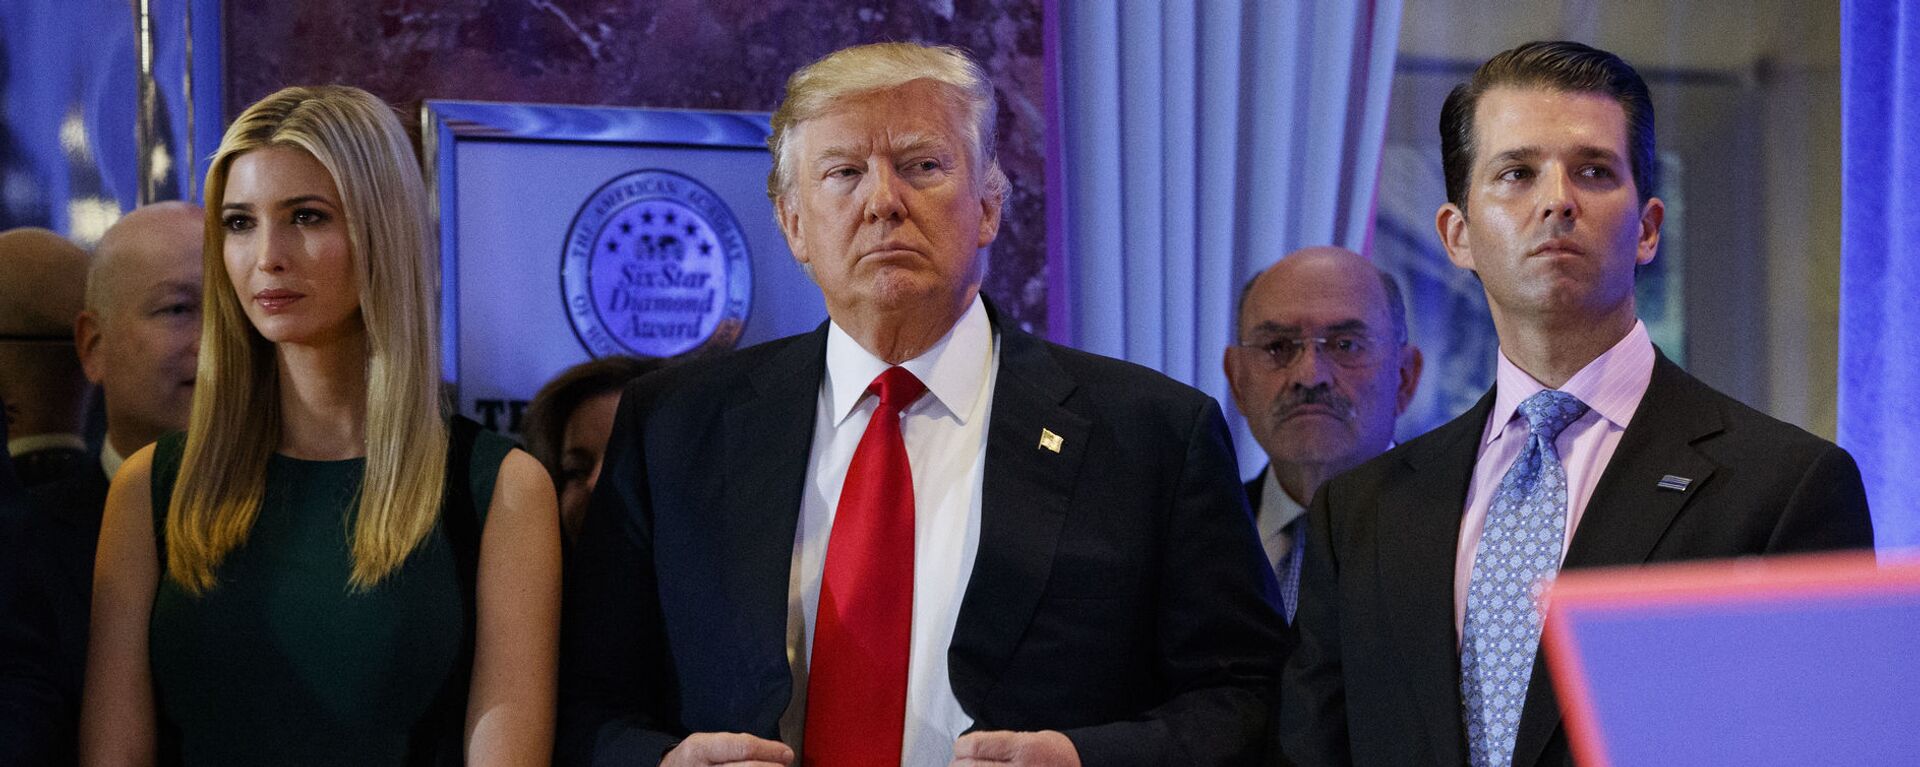 In this Jan. 11, 2017, photo, President-elect Donald Trump, center, stands next to Allen Weisselberg, second from left, Donald Trump Jr., right and Ivanka Trump, left, at a news conference in the lobby of Trump Tower in New York - Sputnik International, 1920, 02.02.2022